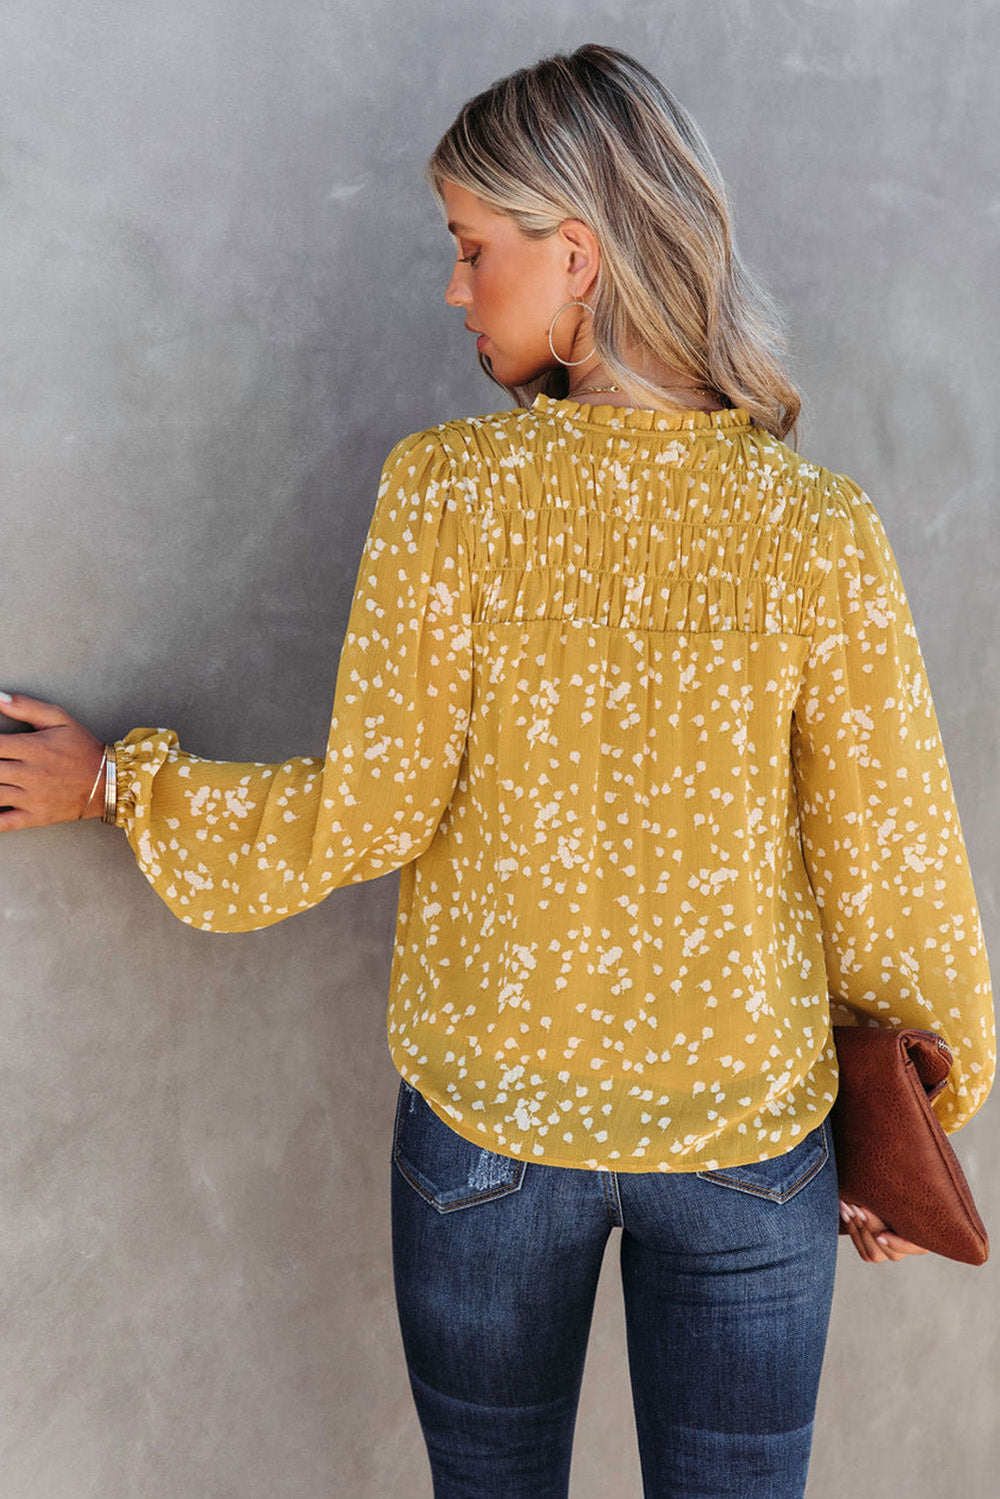 The802Gypsy  Tops TRAVELING GYPSY- Floral Printed Crinkled Blouse